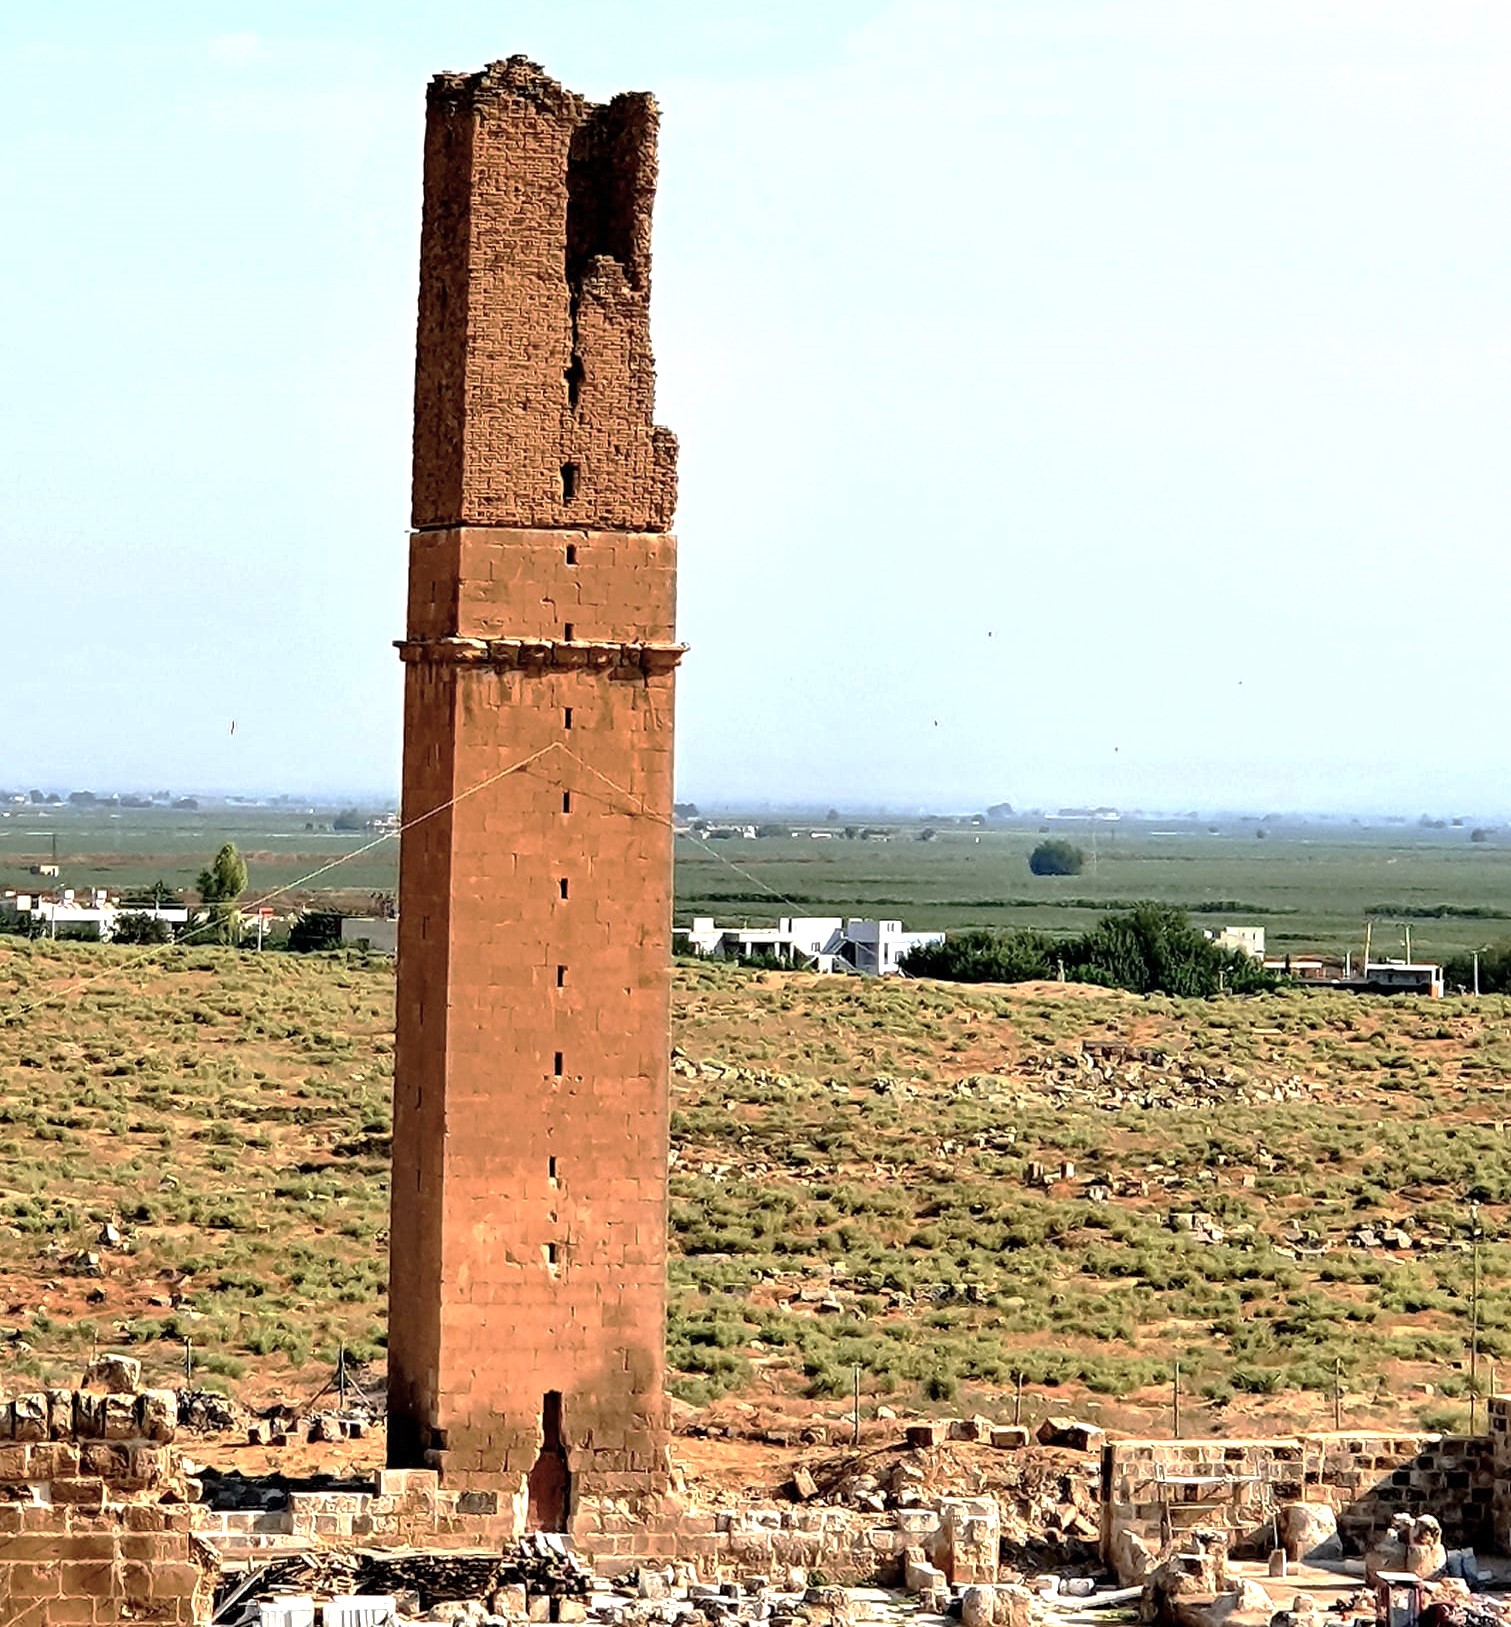 This tower at Harran was once used by the Sabeans as an observation point for astronomy.